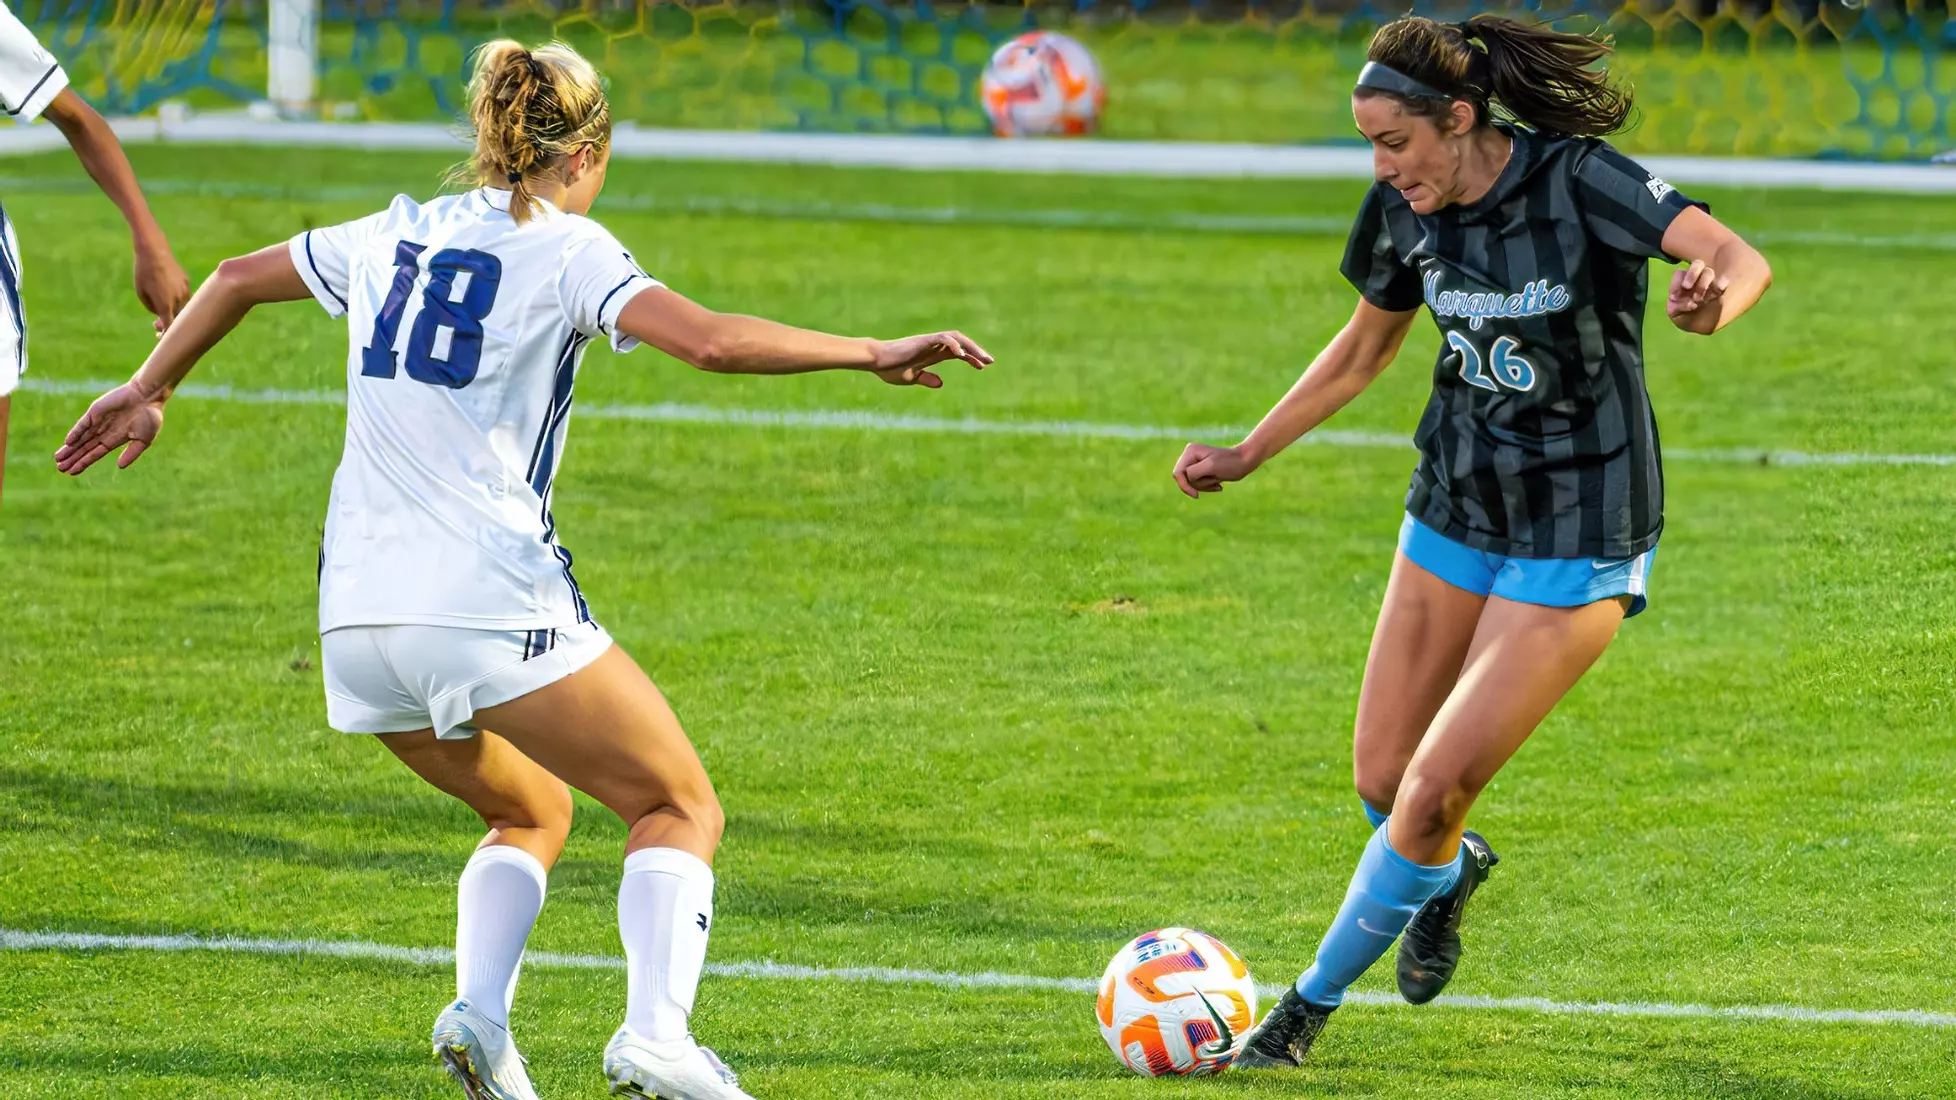 Fix scores first career goal for Marquette in 1-1 draw – Marquette Wire